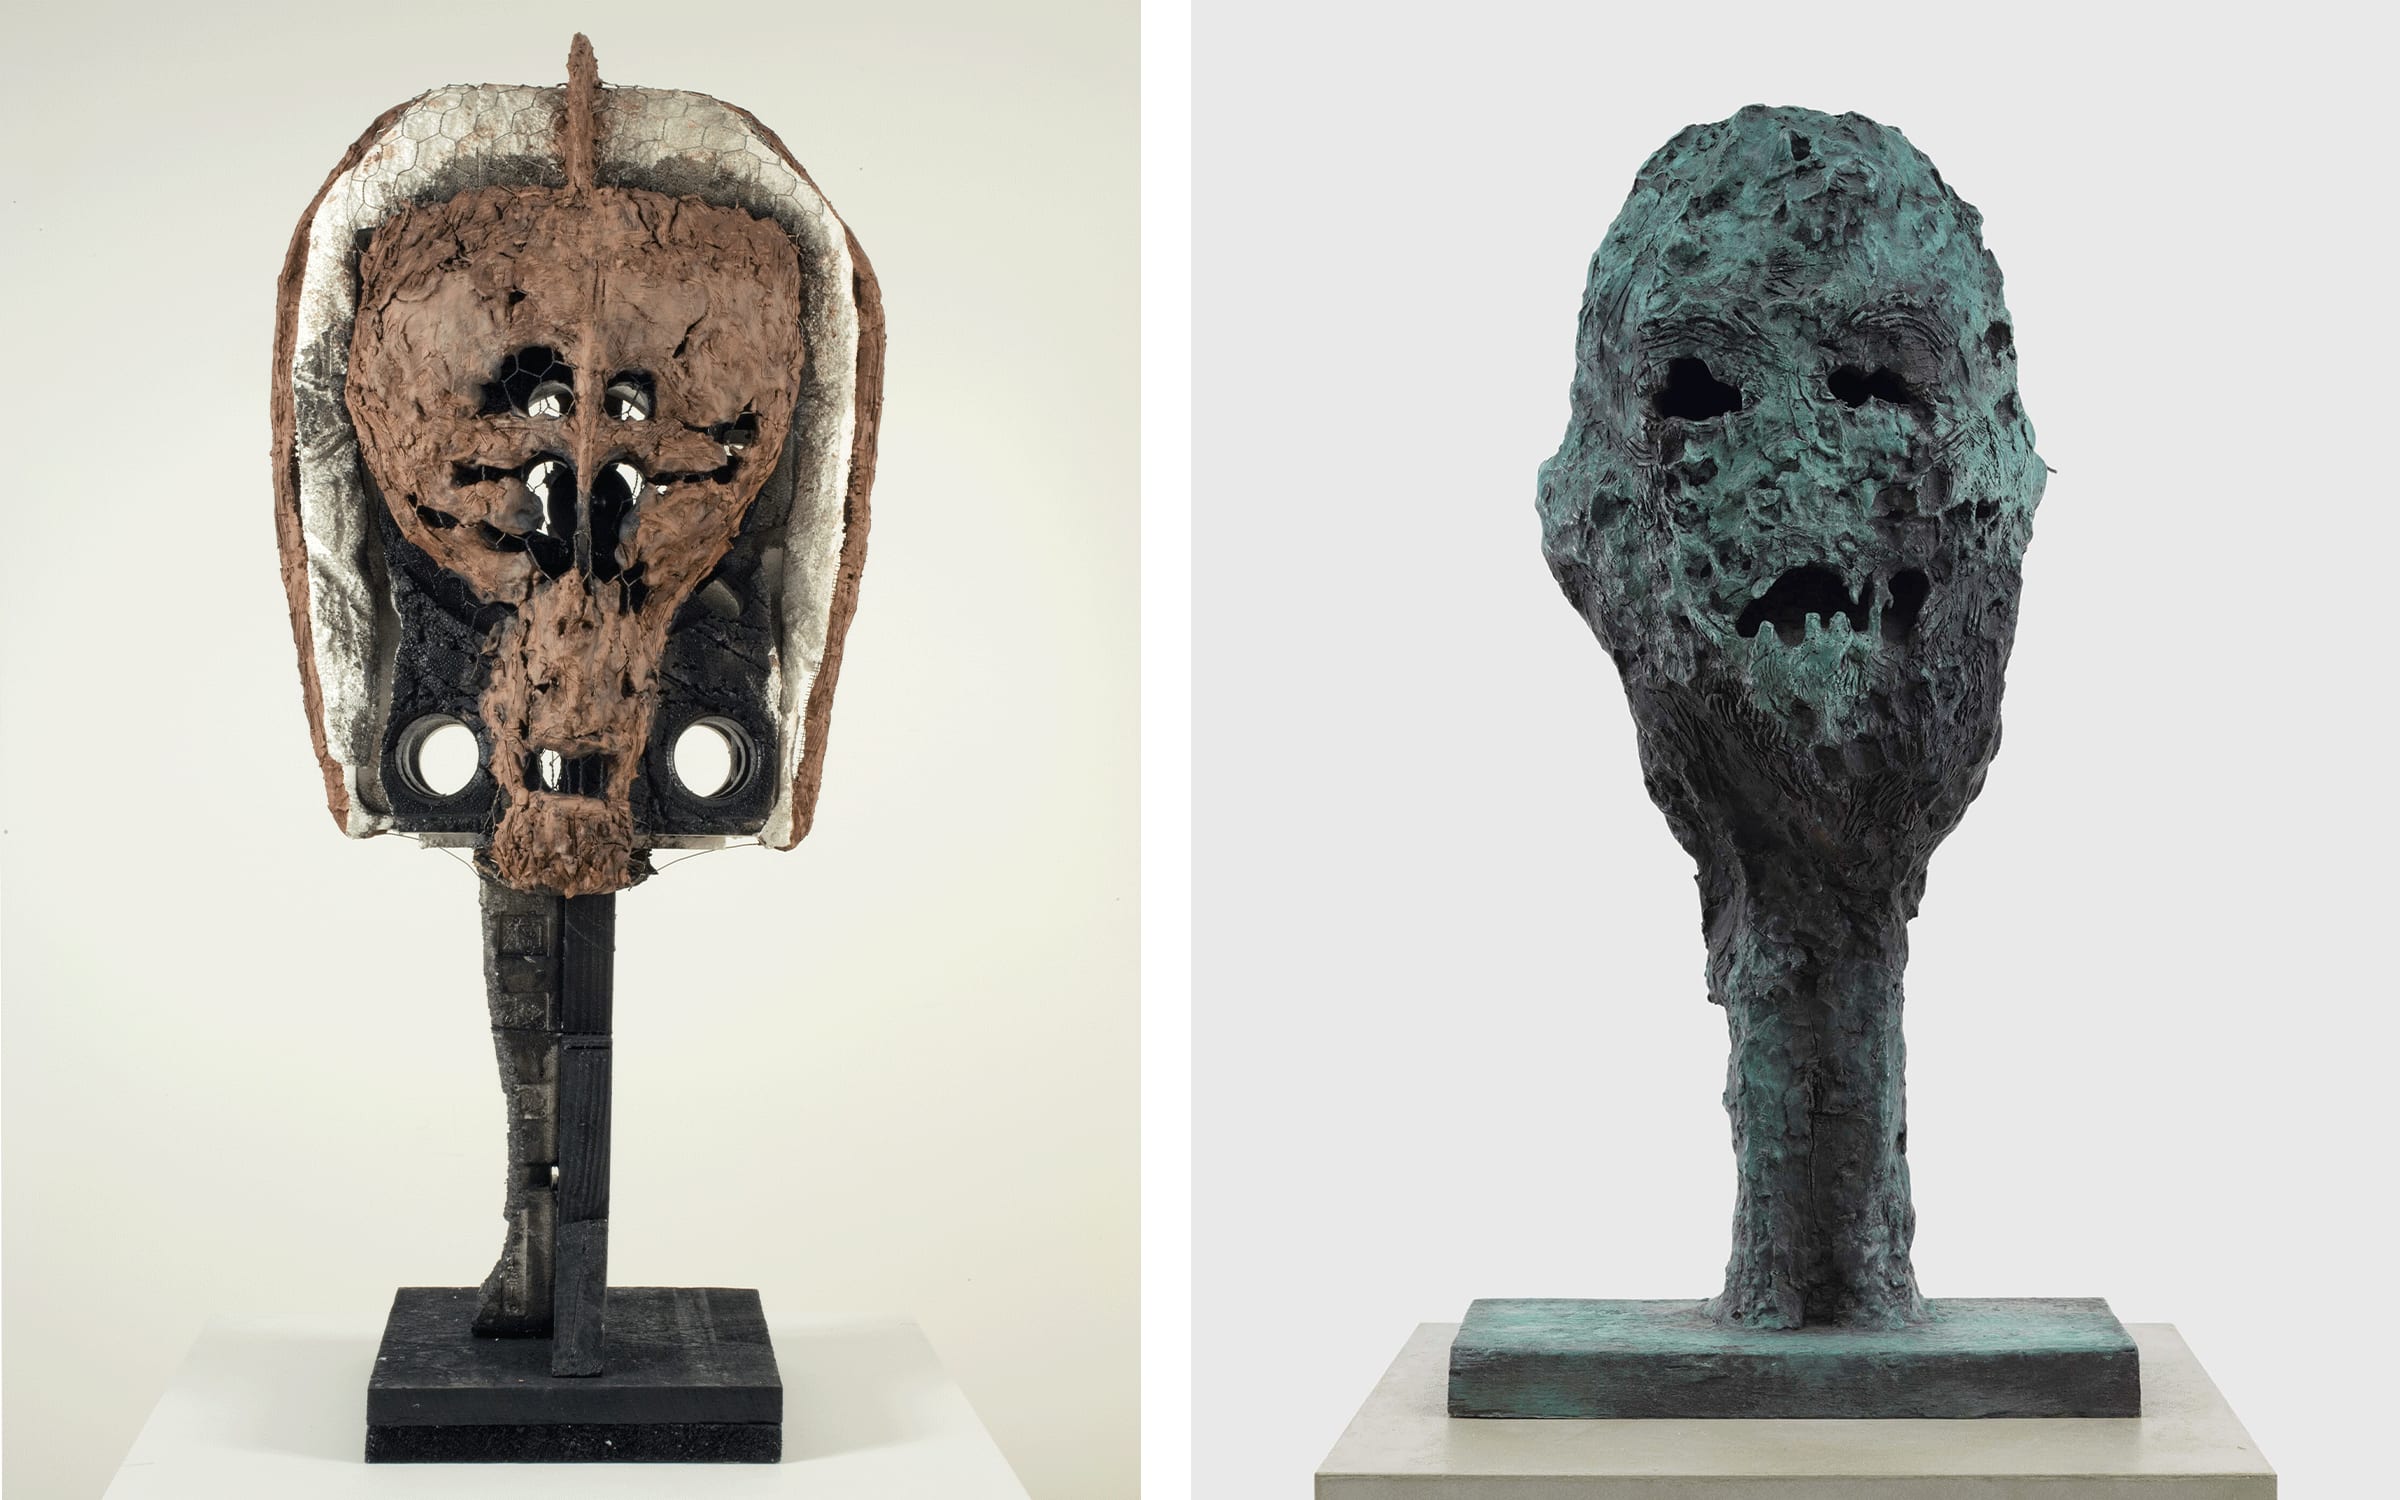 Artworks by Huma Bhabha. Left: Call at Will, 2009. Private collection. Right: The Ancient and Arcane, 2021. Michel Urbain Collection. Courtesy of the artist and David Zwirner.